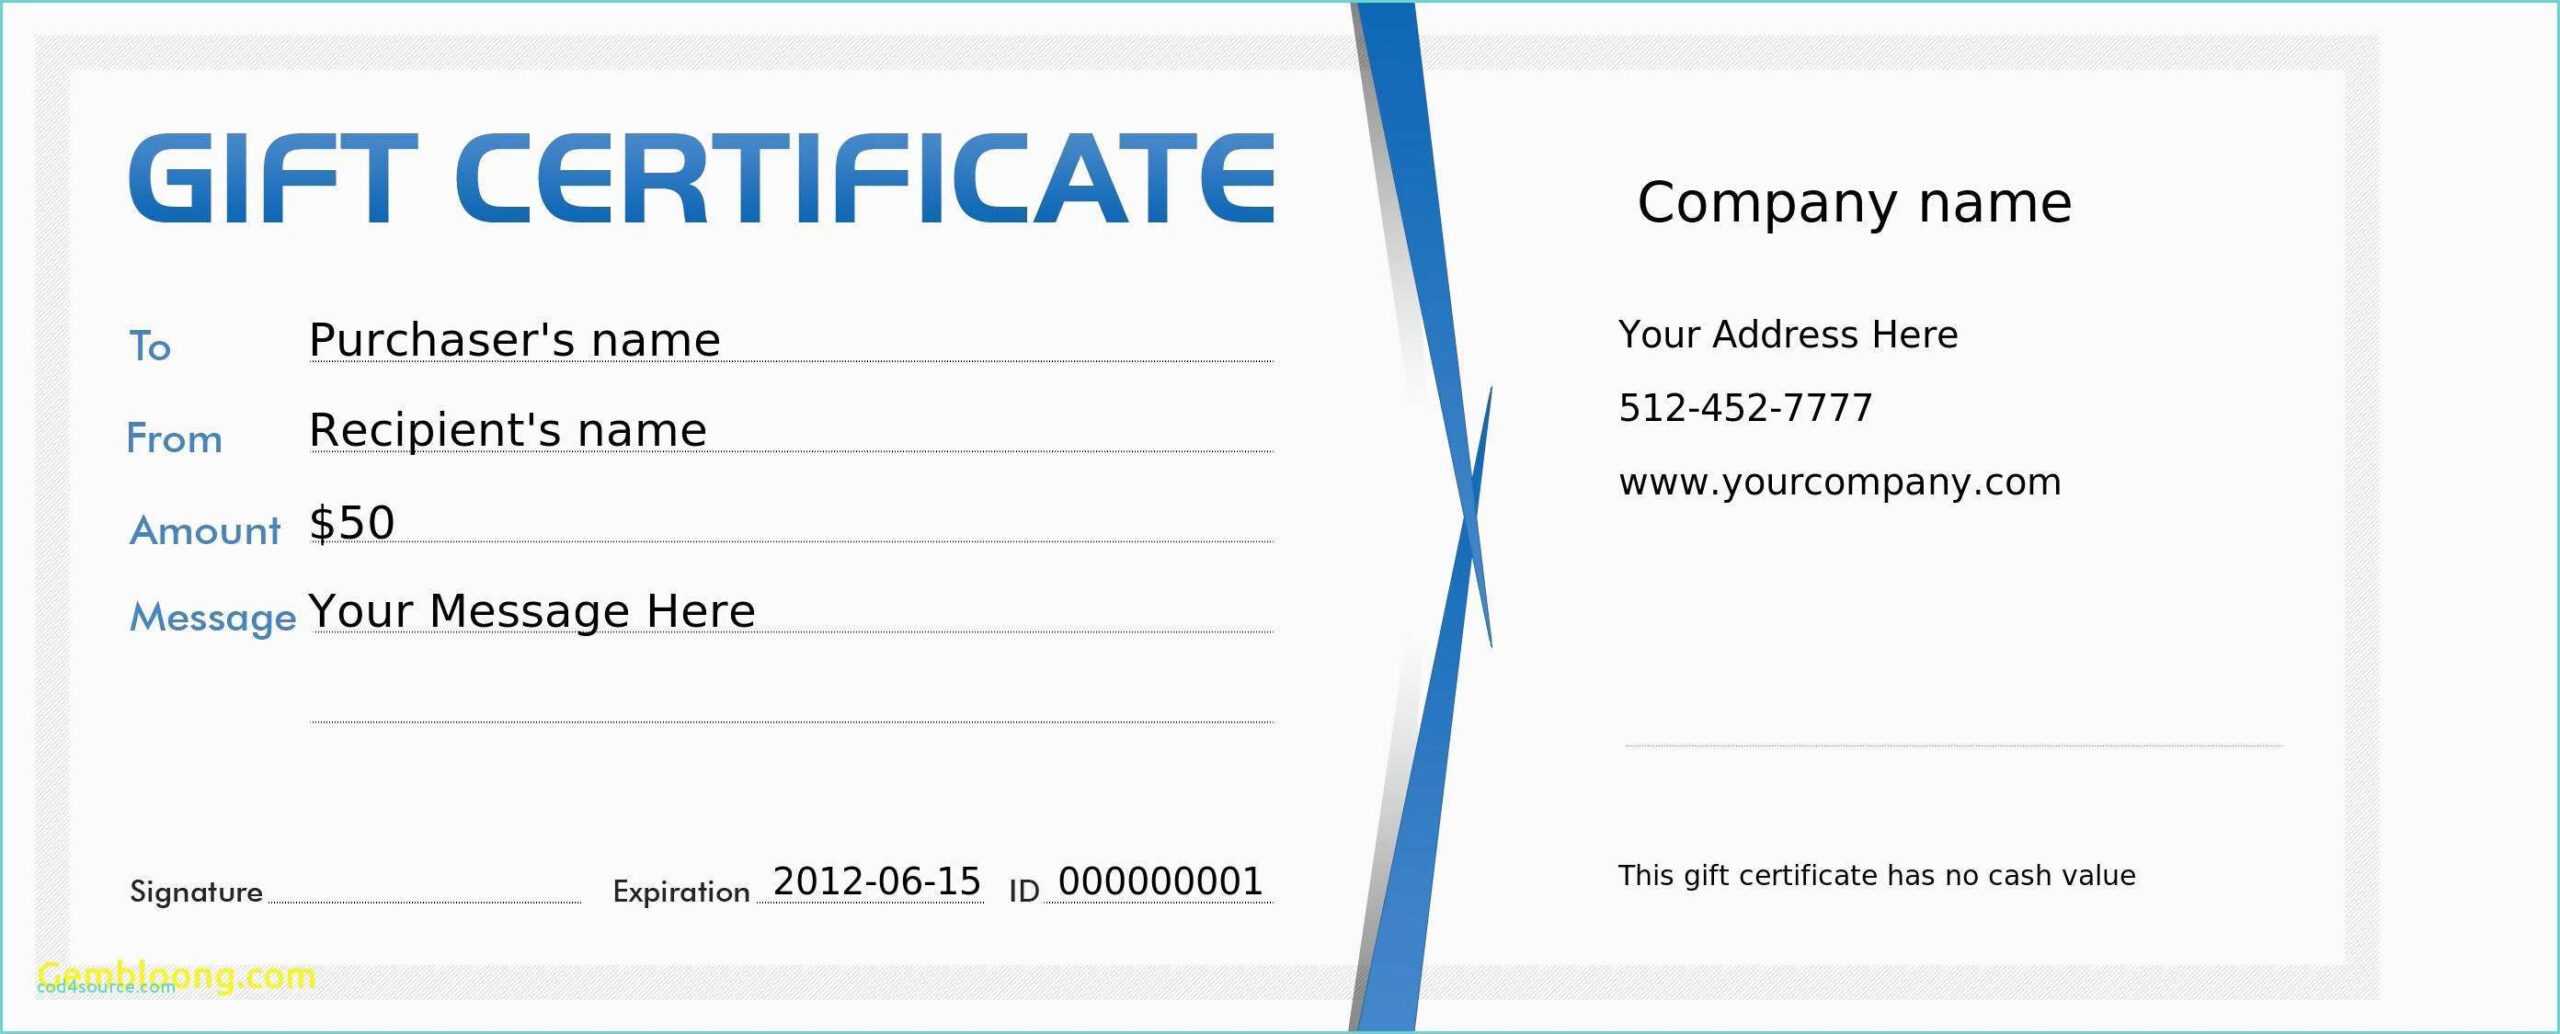 Gift Certificate Template Microsoft Publisher Inside Publisher Gift Certificate Template